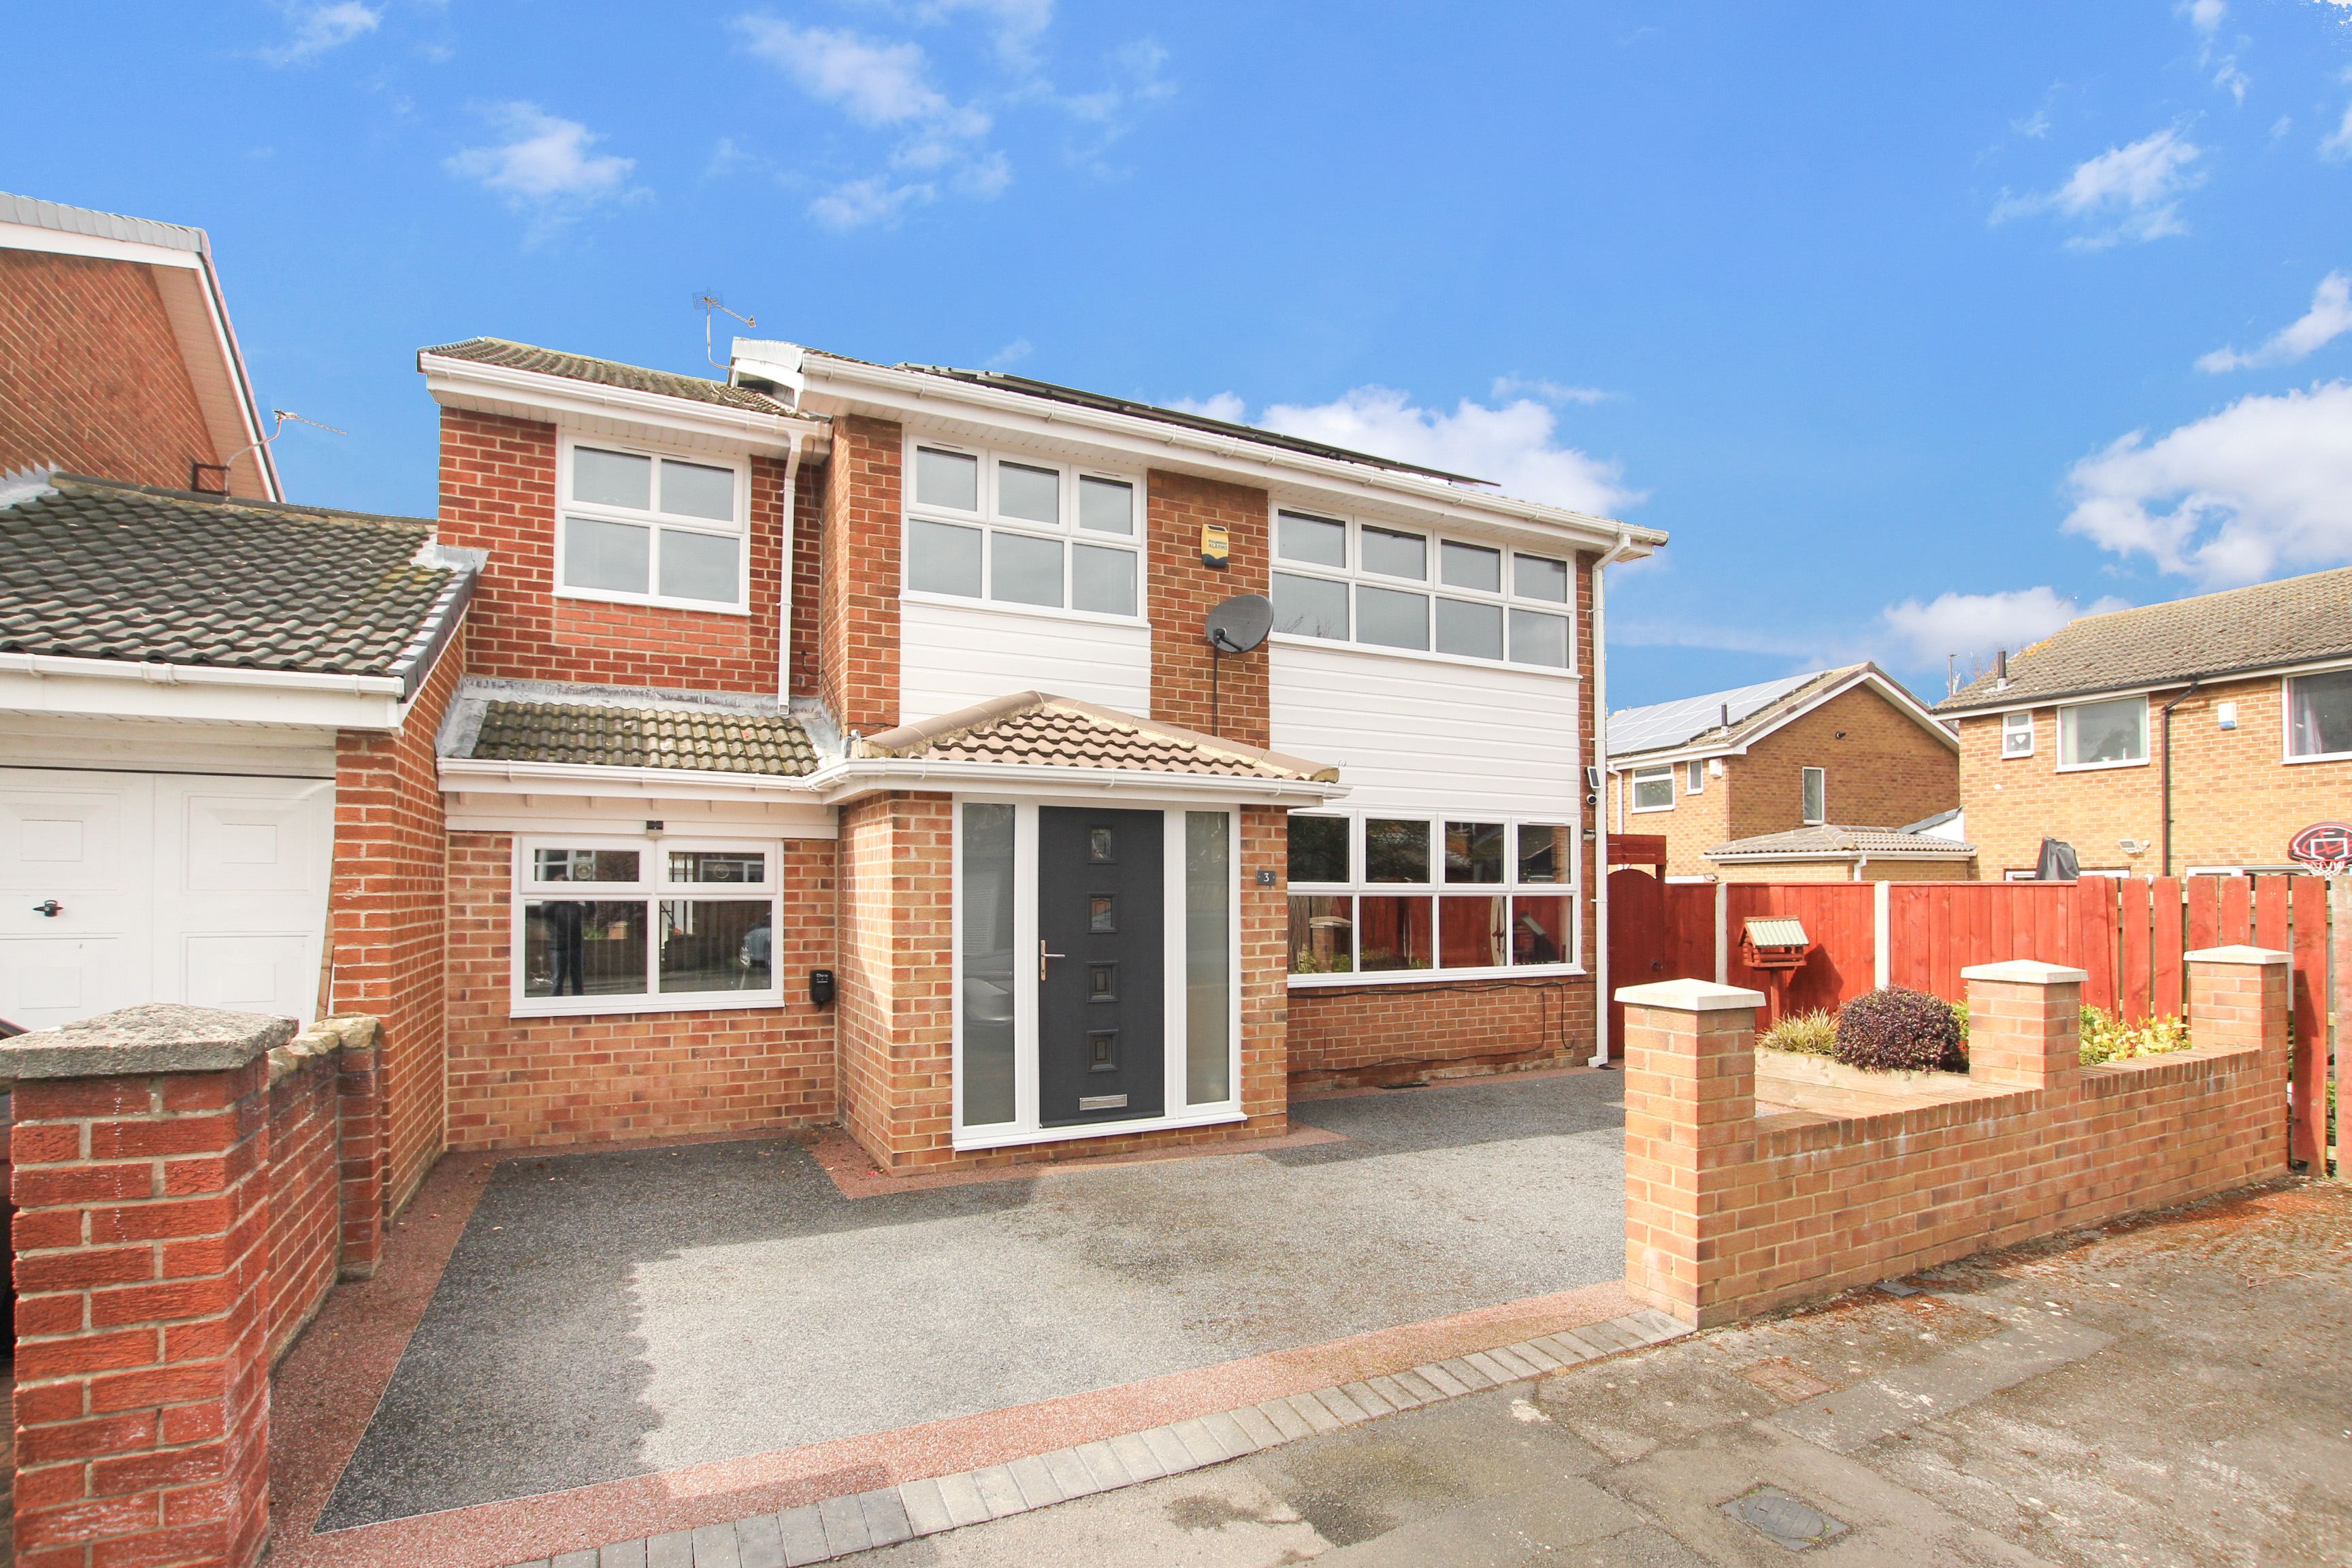 4 bed house for sale in Starbeck Close, New Marske - Property Image 1